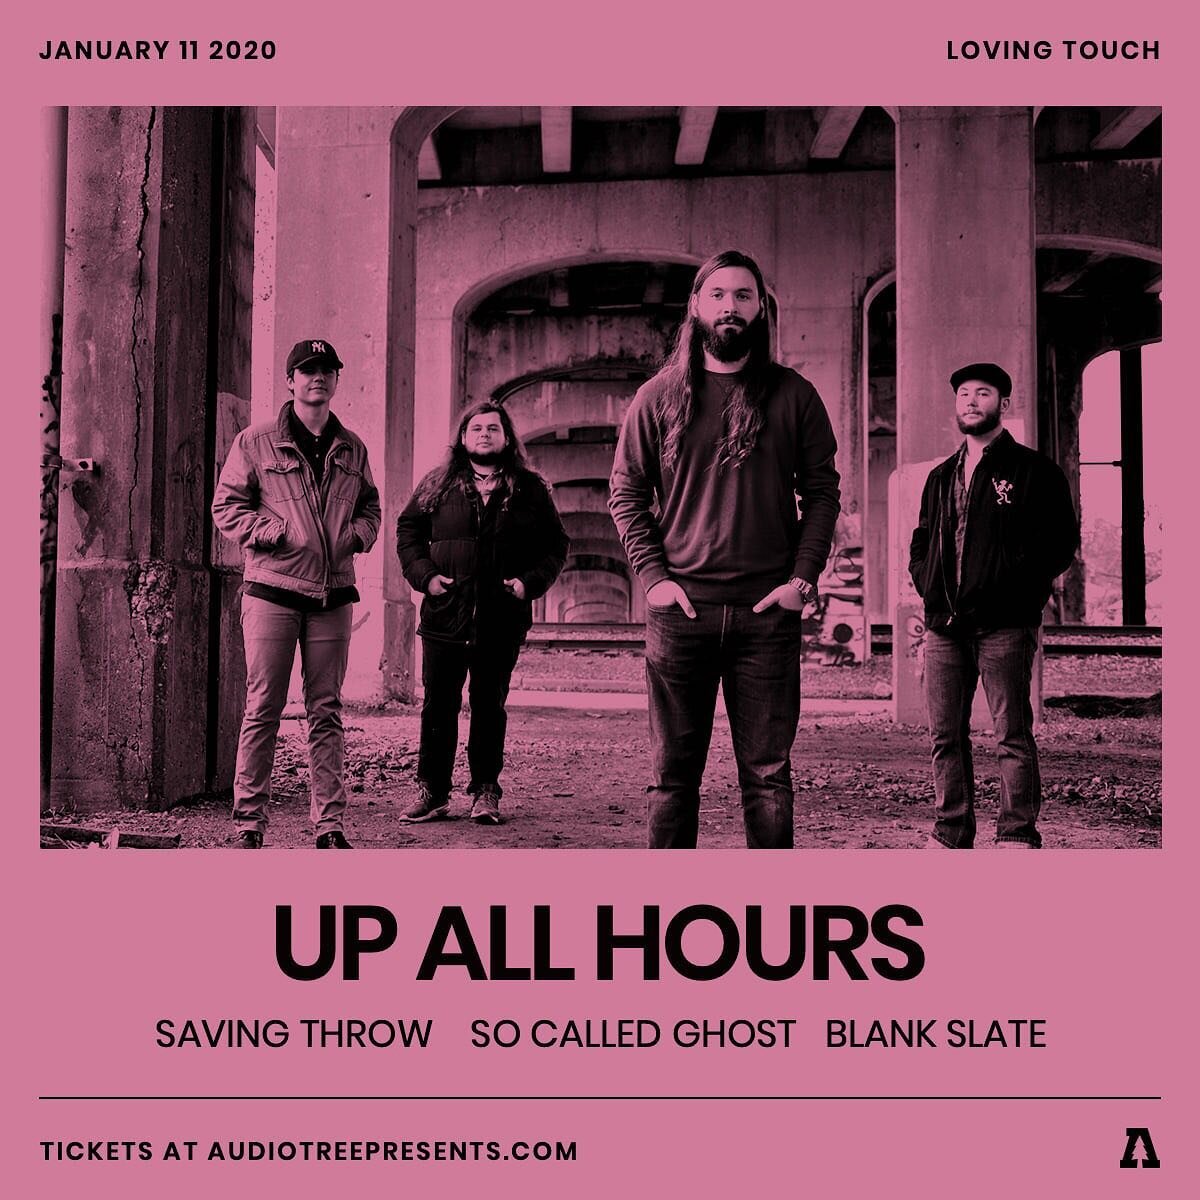 ☀️Our first show of 2020 is less than a week away! We can&rsquo;t wait to perform with @upallhoursmi, @savingthr0w, and @socalledghost! Tickets are $10 in advance and $12 at the door. We play at 7:45 and doors open at 7:00! Thanks @audiotreepresents 